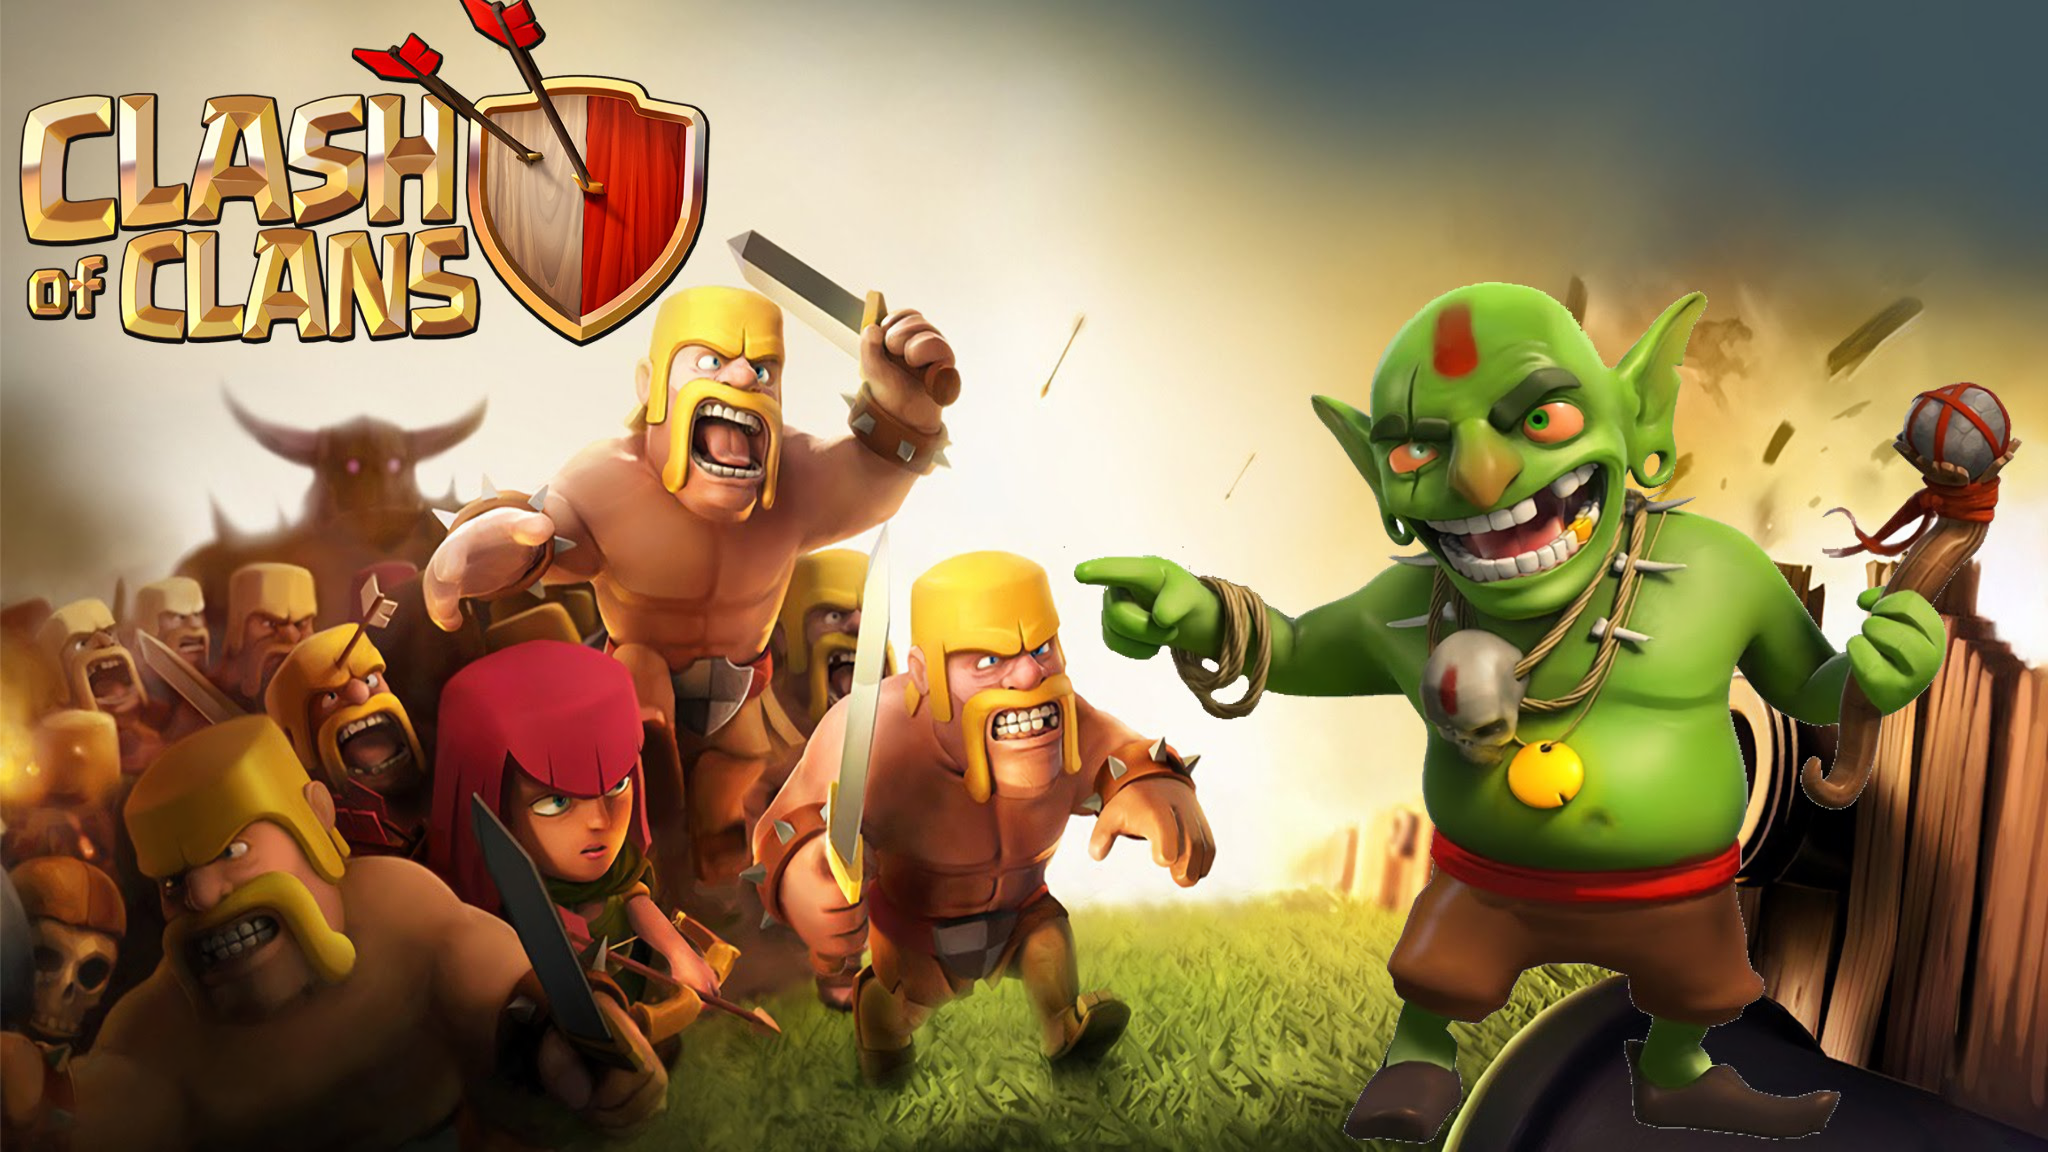 521992 1920x1080 clash of clans images for desktop background Rare Gallery HD Wallpapers